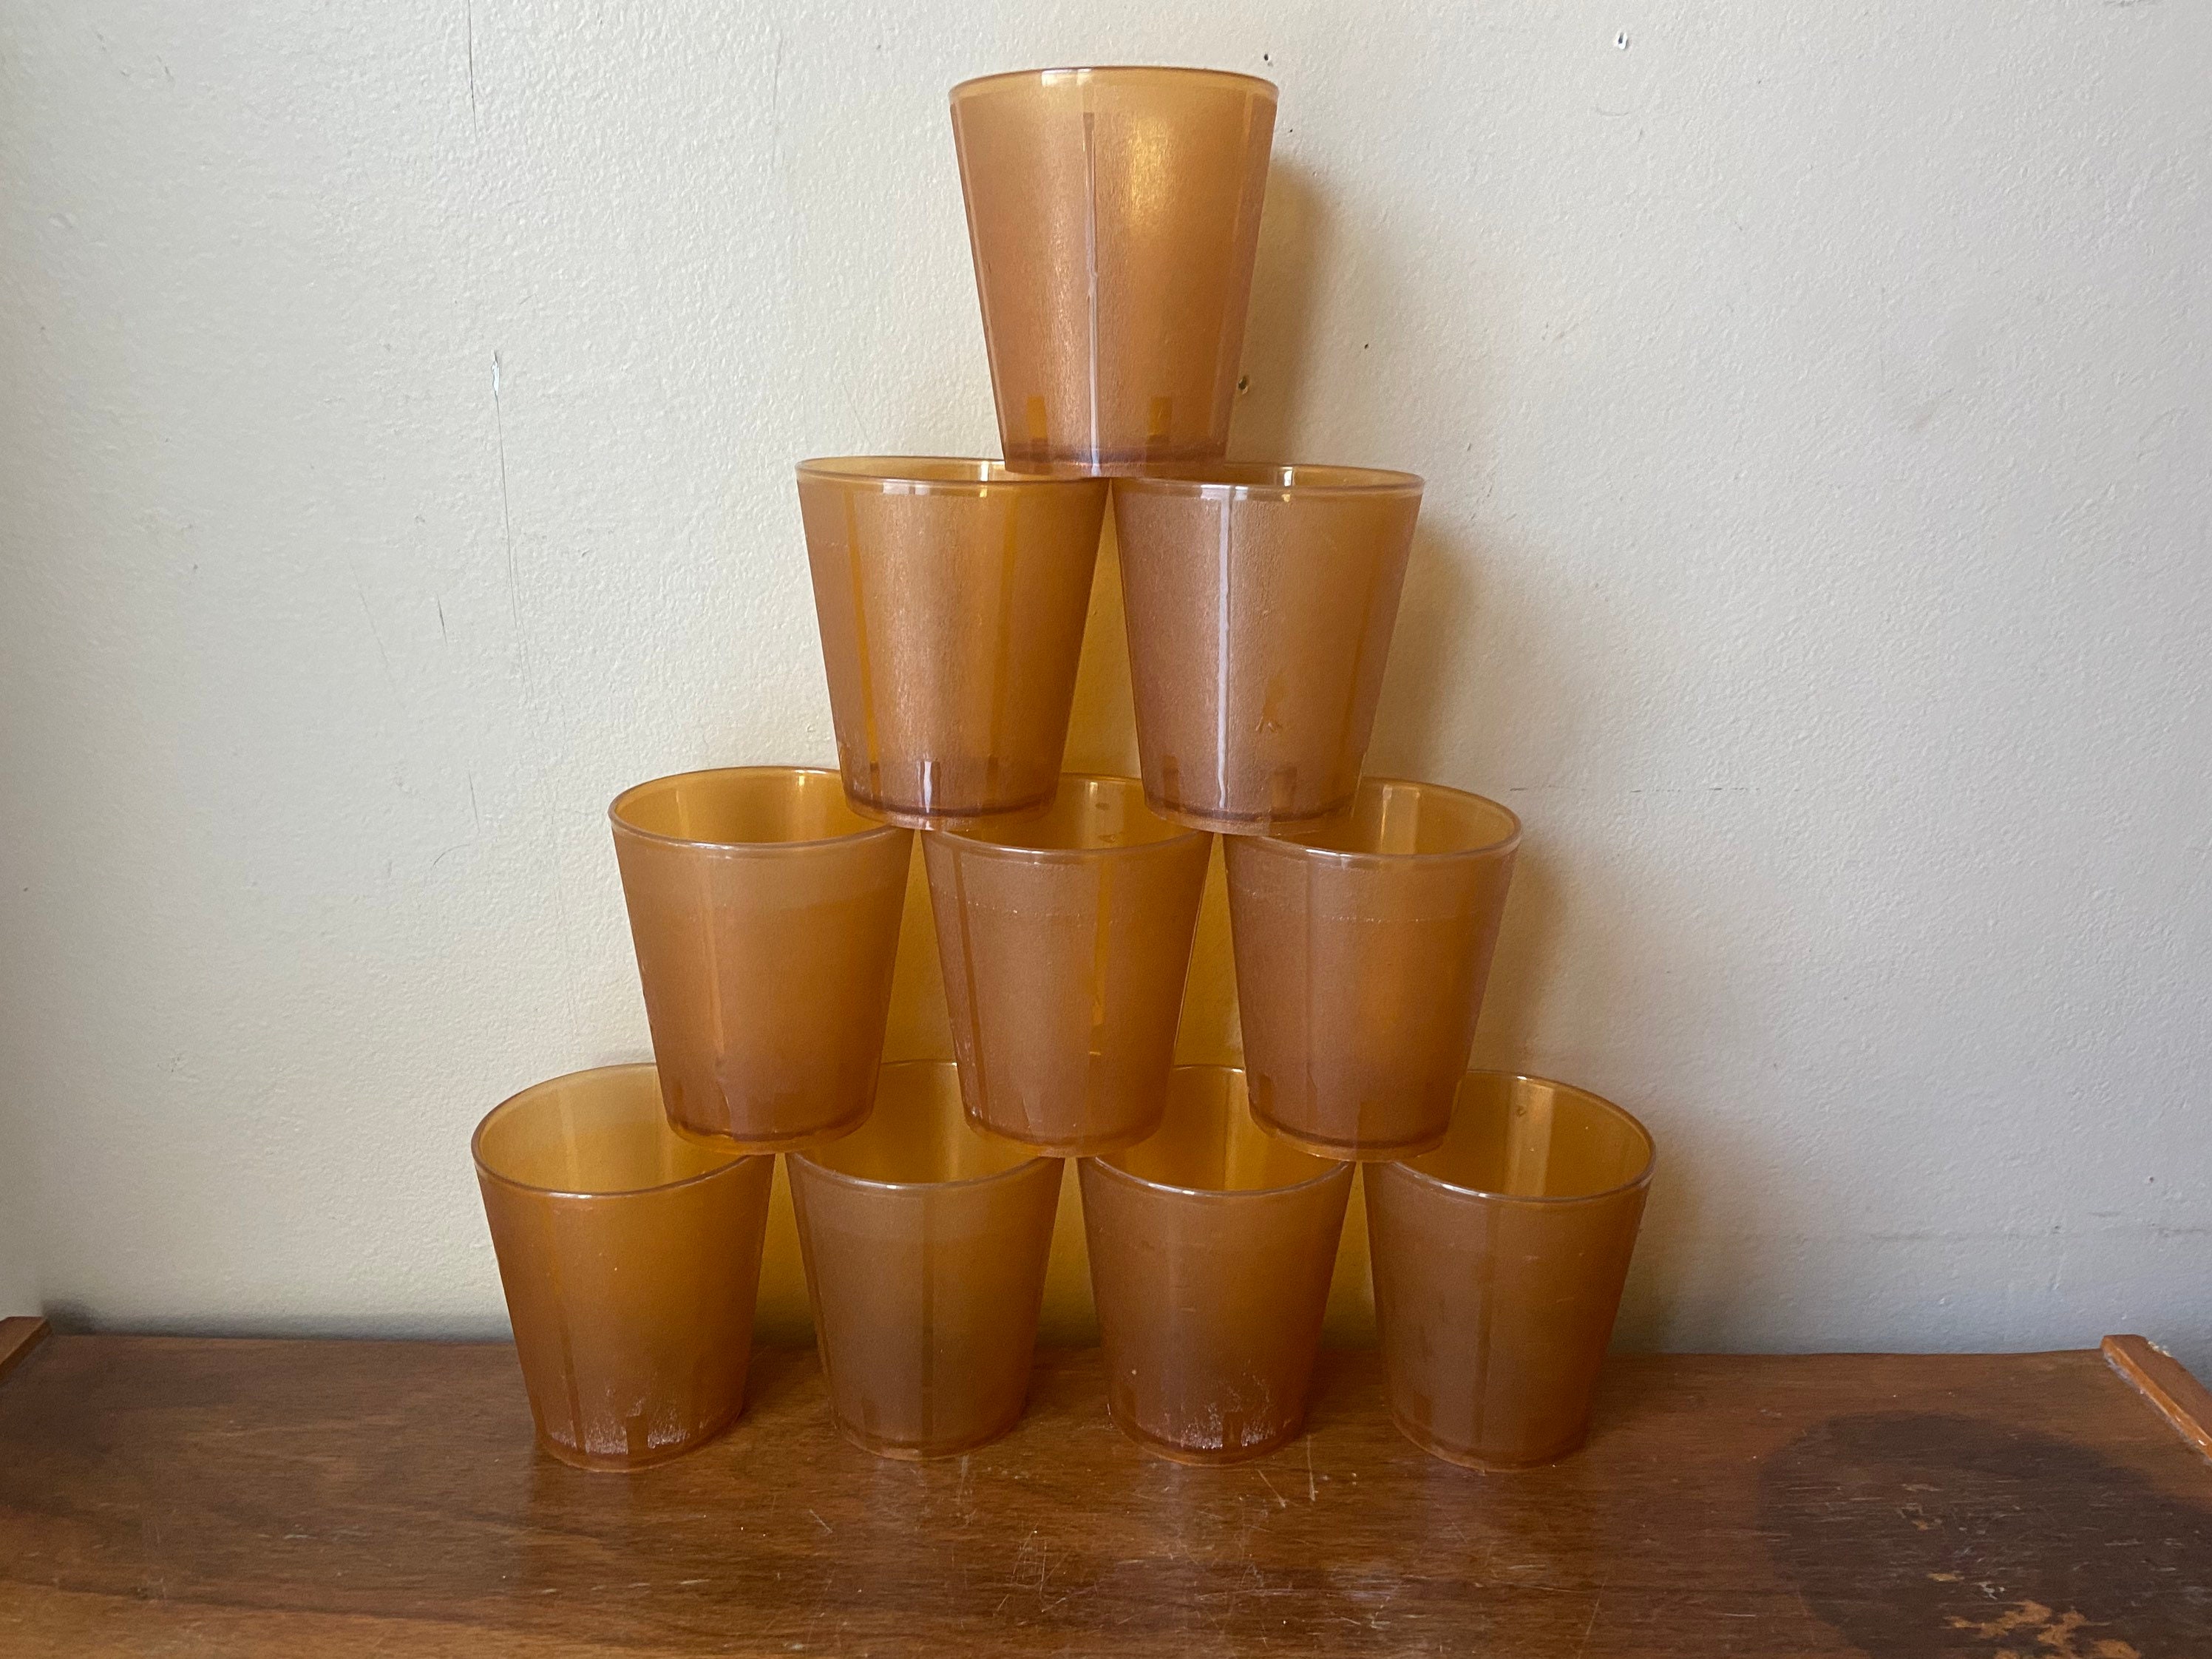 Vintage Amber Brown Short/Small Water Glasses 3.75” Tall - Set Of 3